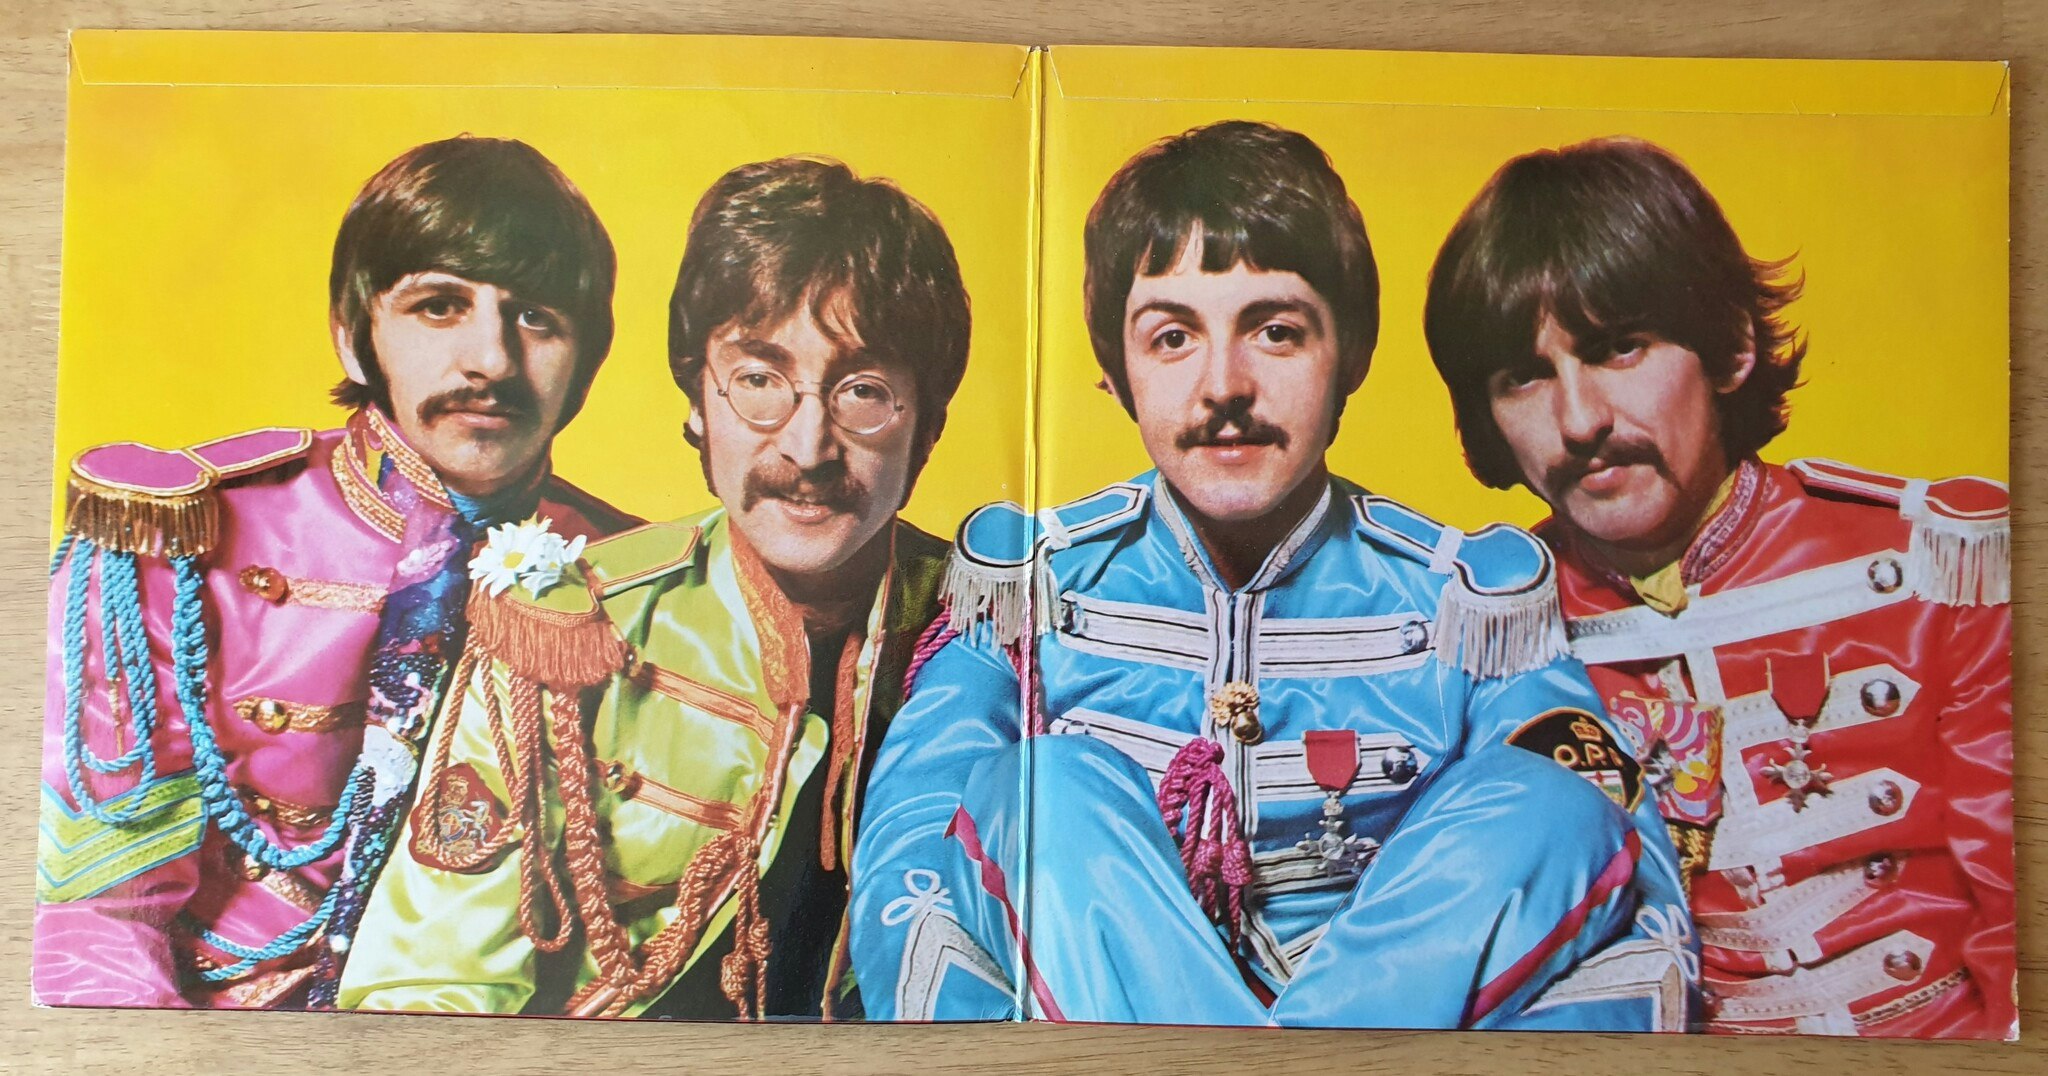 The Beatles, Sgt Peppers Lonely hearts club band. Vinyl LP